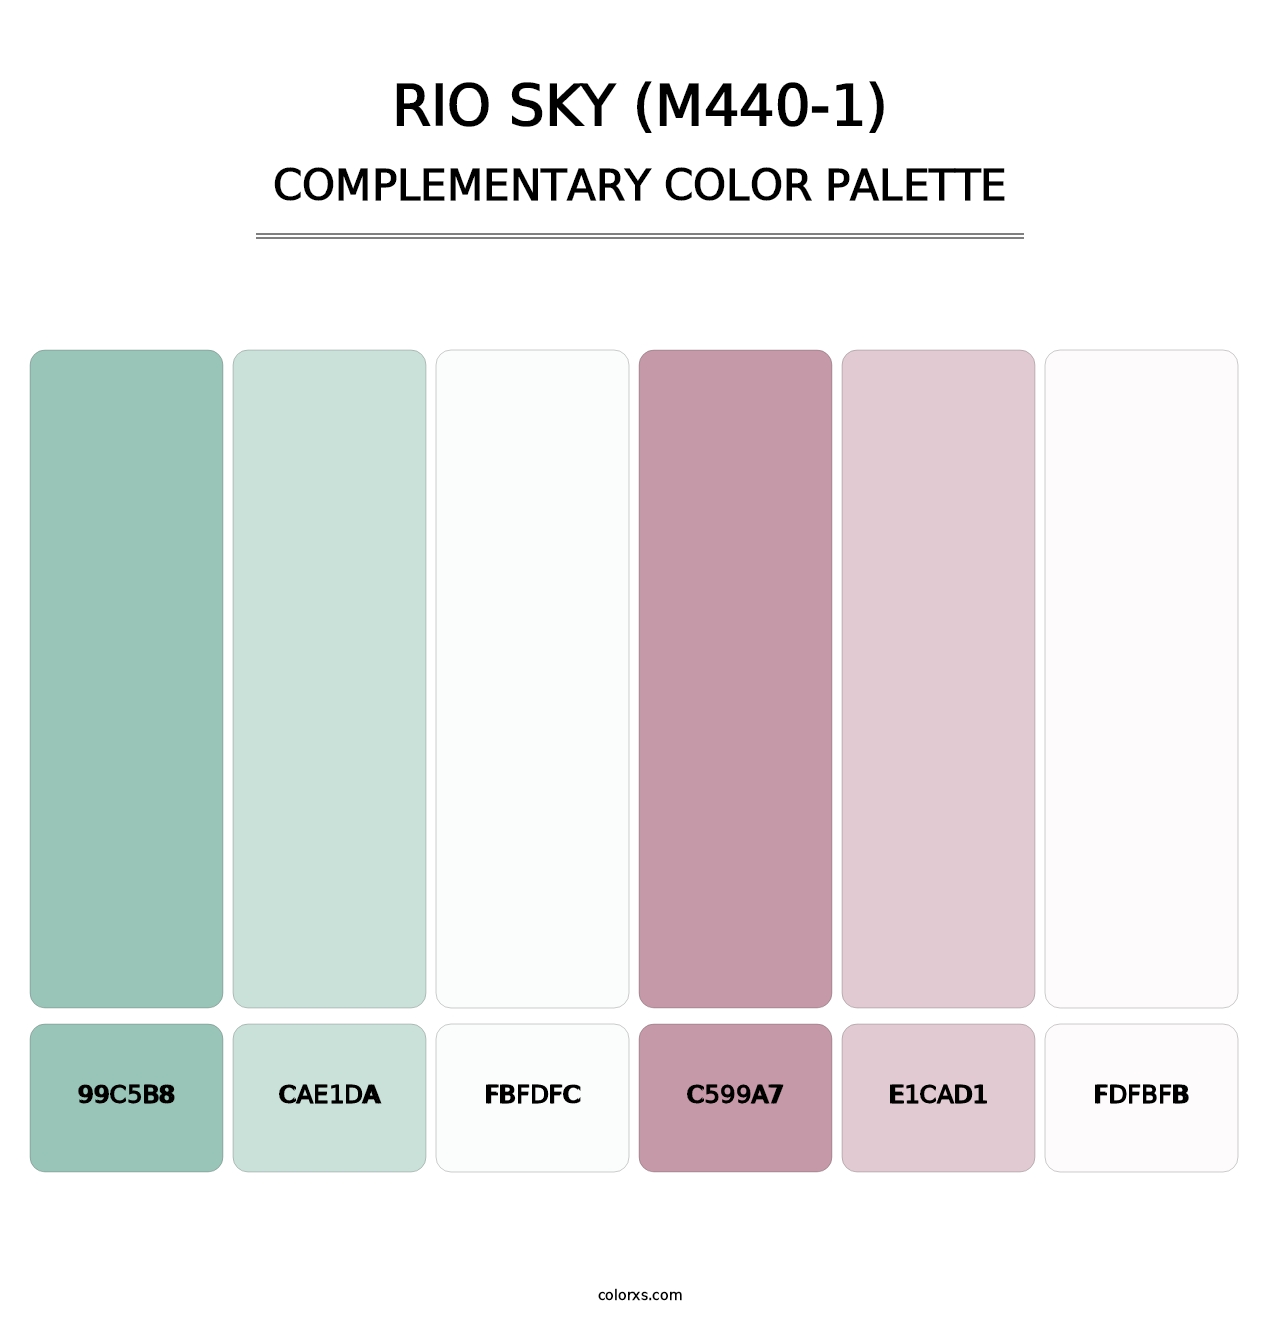 Rio Sky (M440-1) - Complementary Color Palette